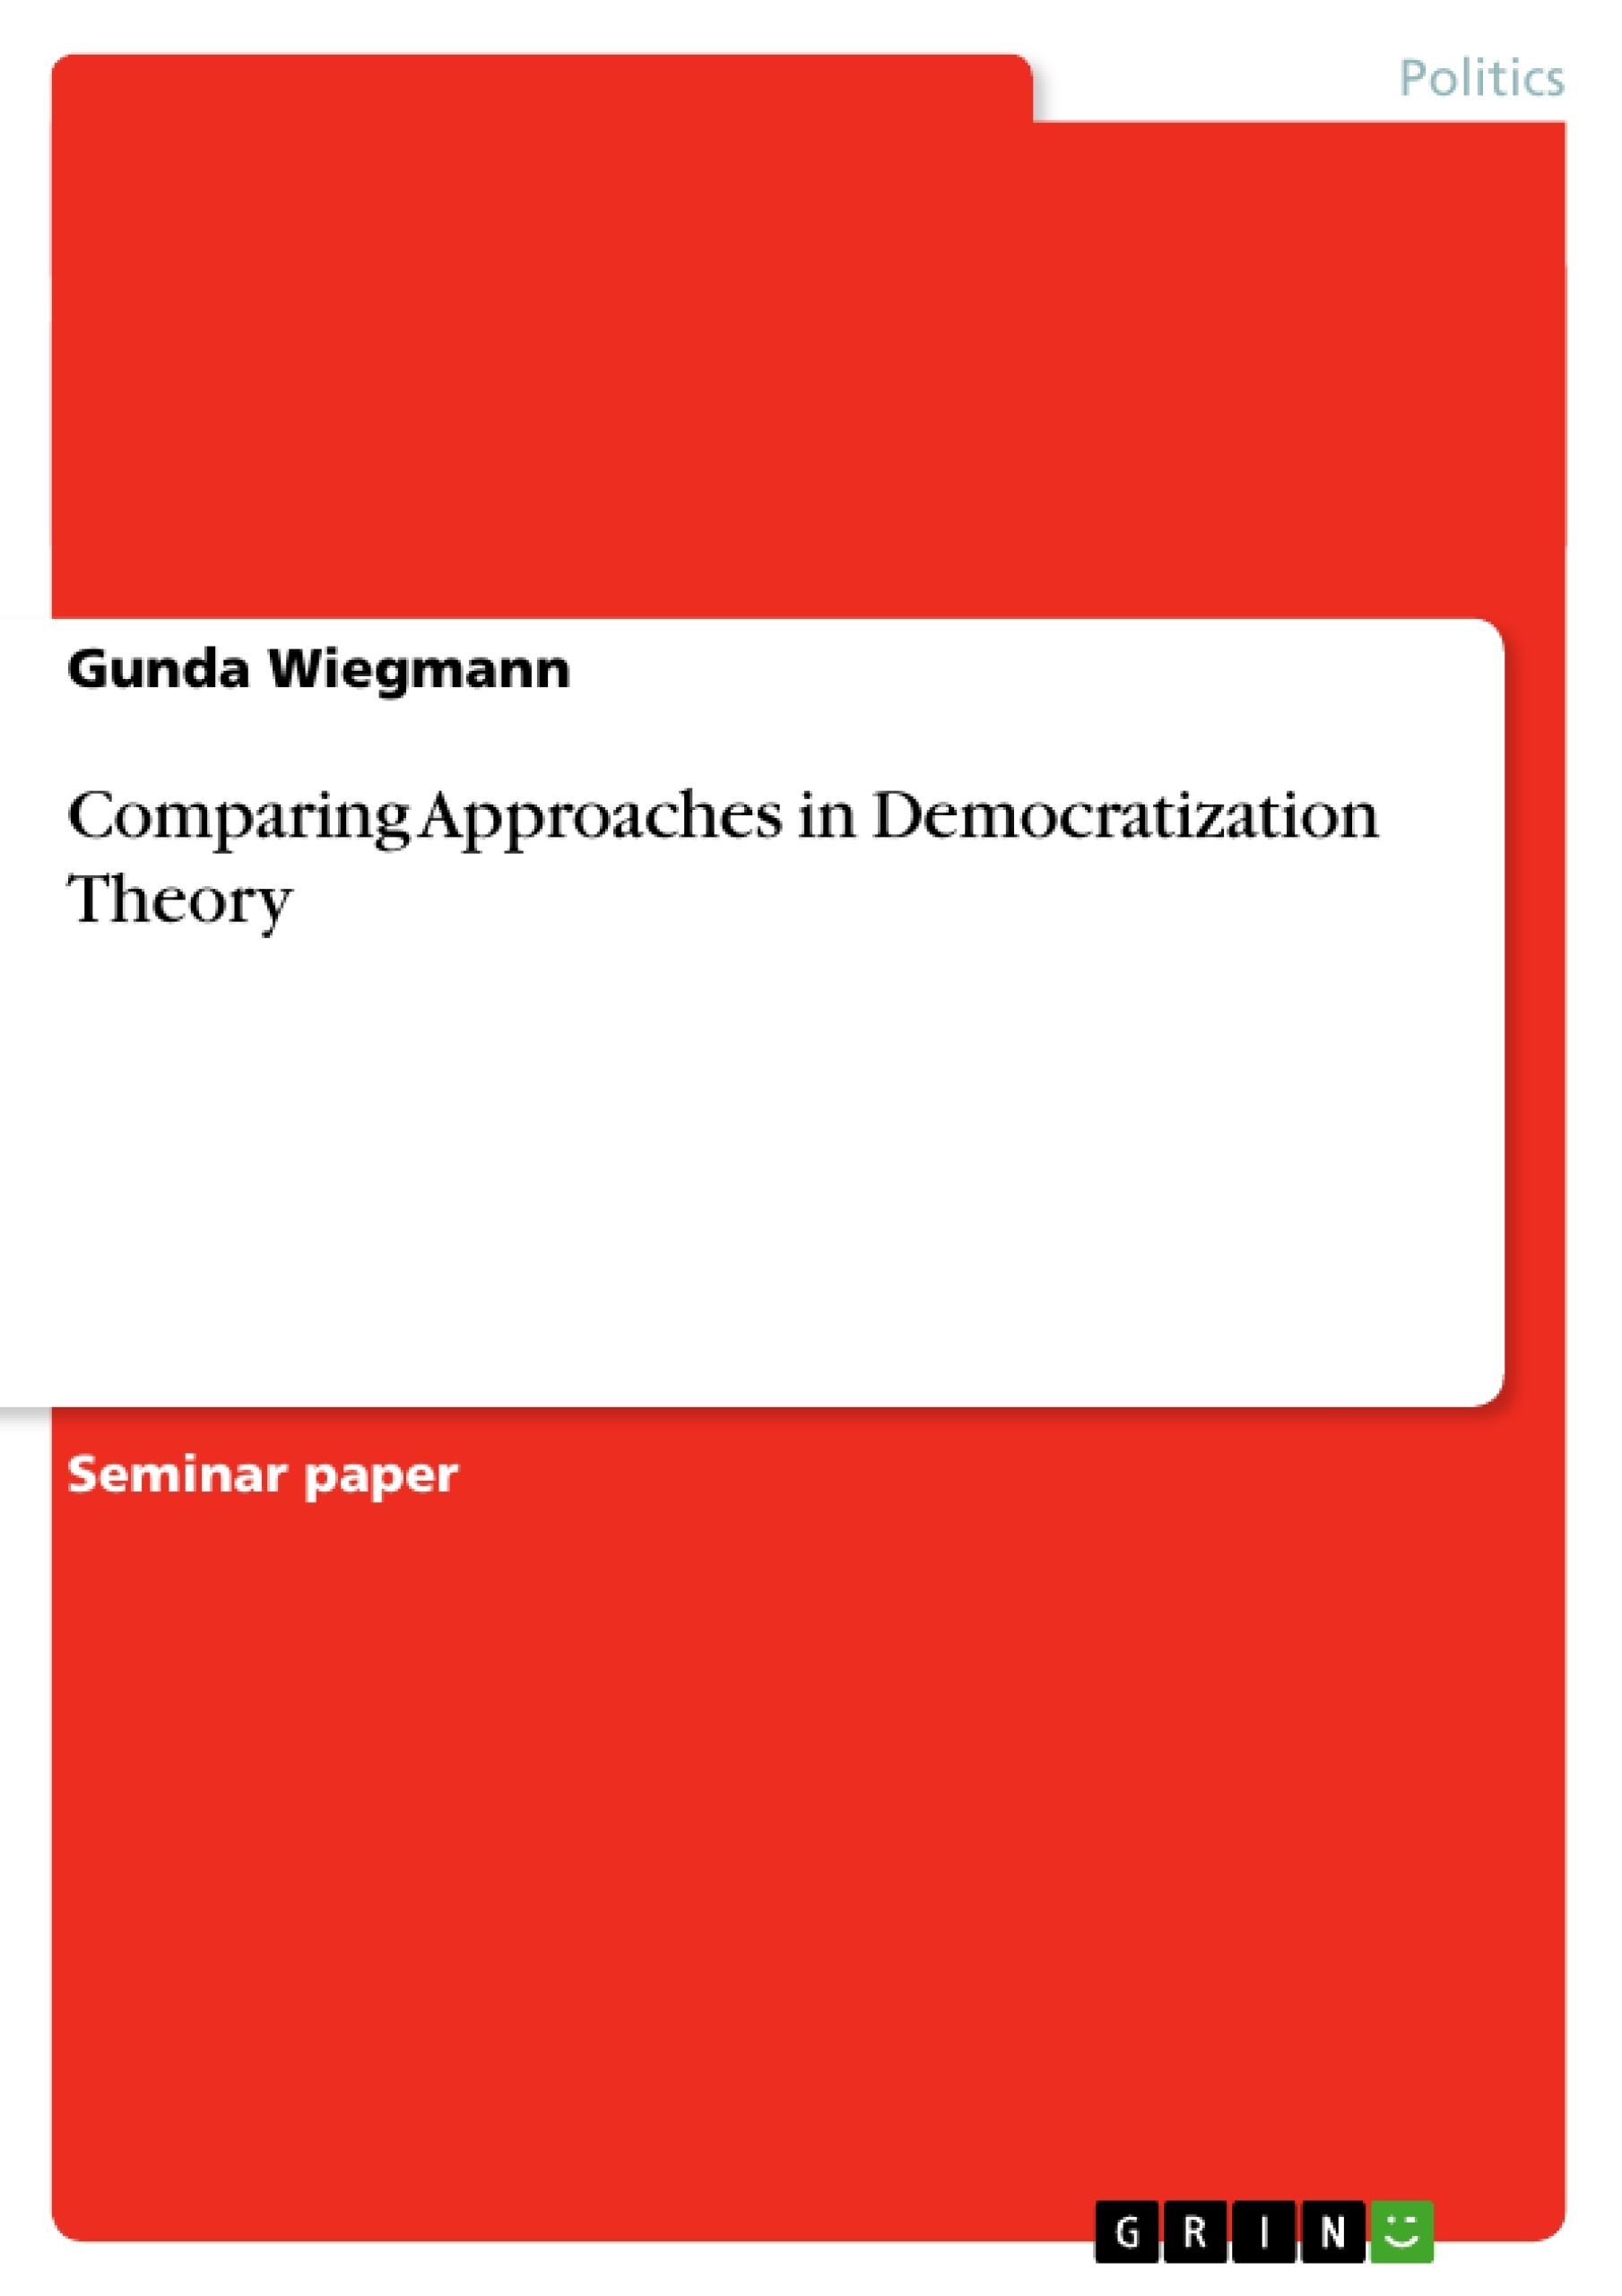 Title: Comparing Approaches in Democratization Theory